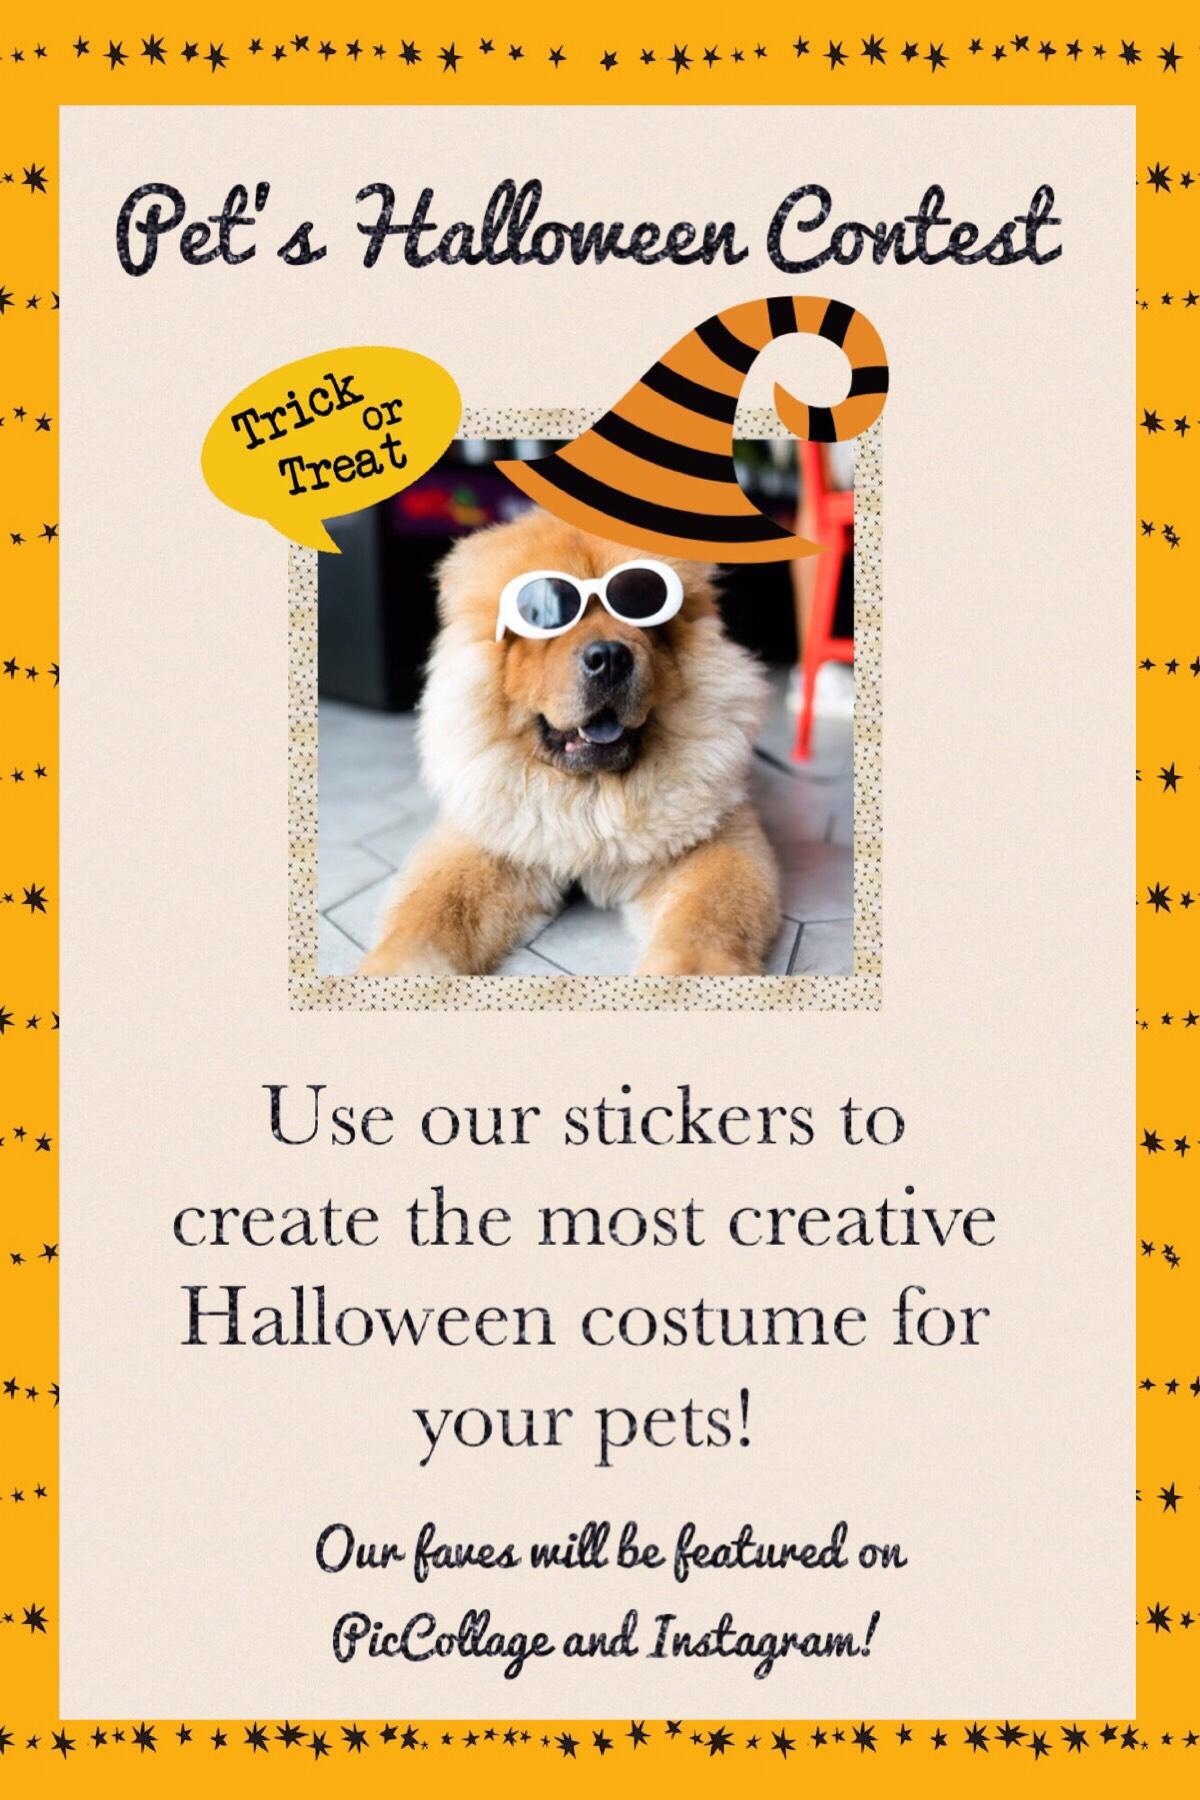 Check out our Pet’s Halloween Contest! Deadline is November 1, 2018! 🎃